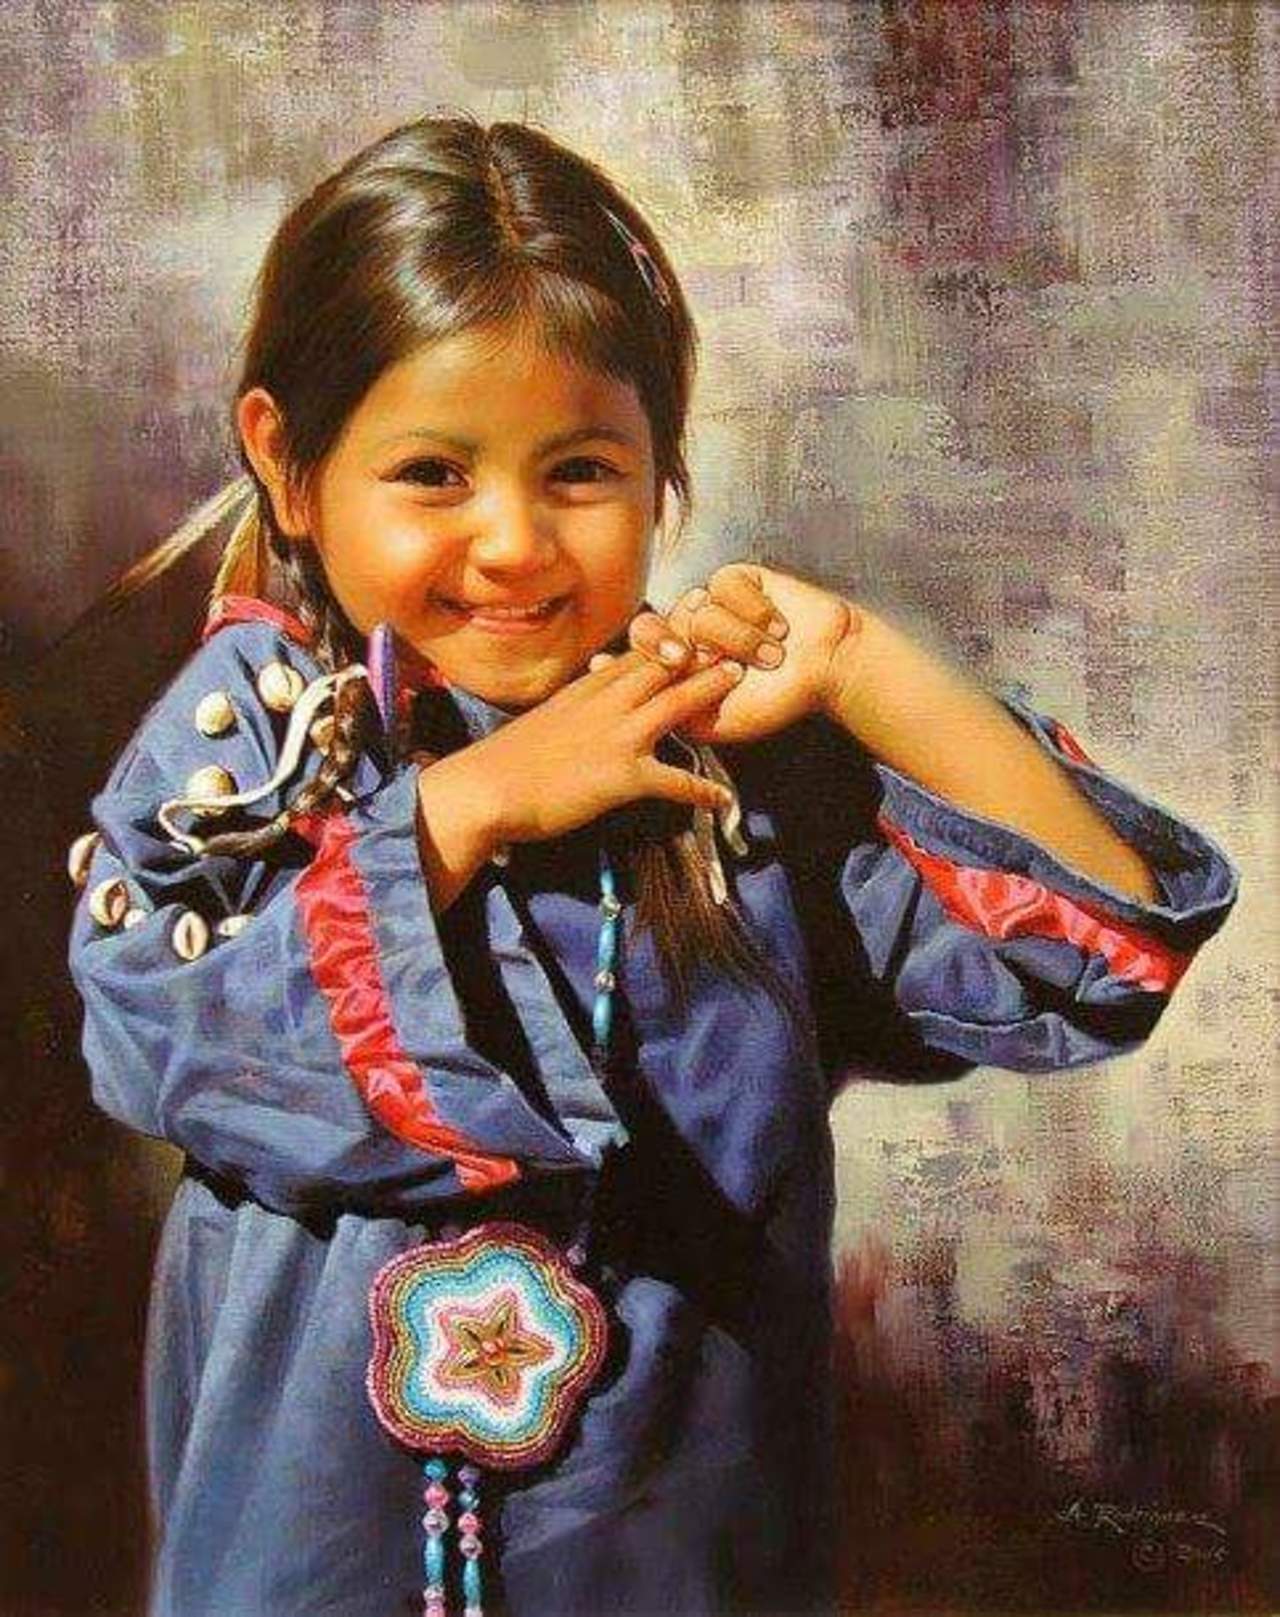 A Spoonfull of Sugar
By Alfredo Ridrguez
American Painter
1954- http://t.co/ZFiICEadOp